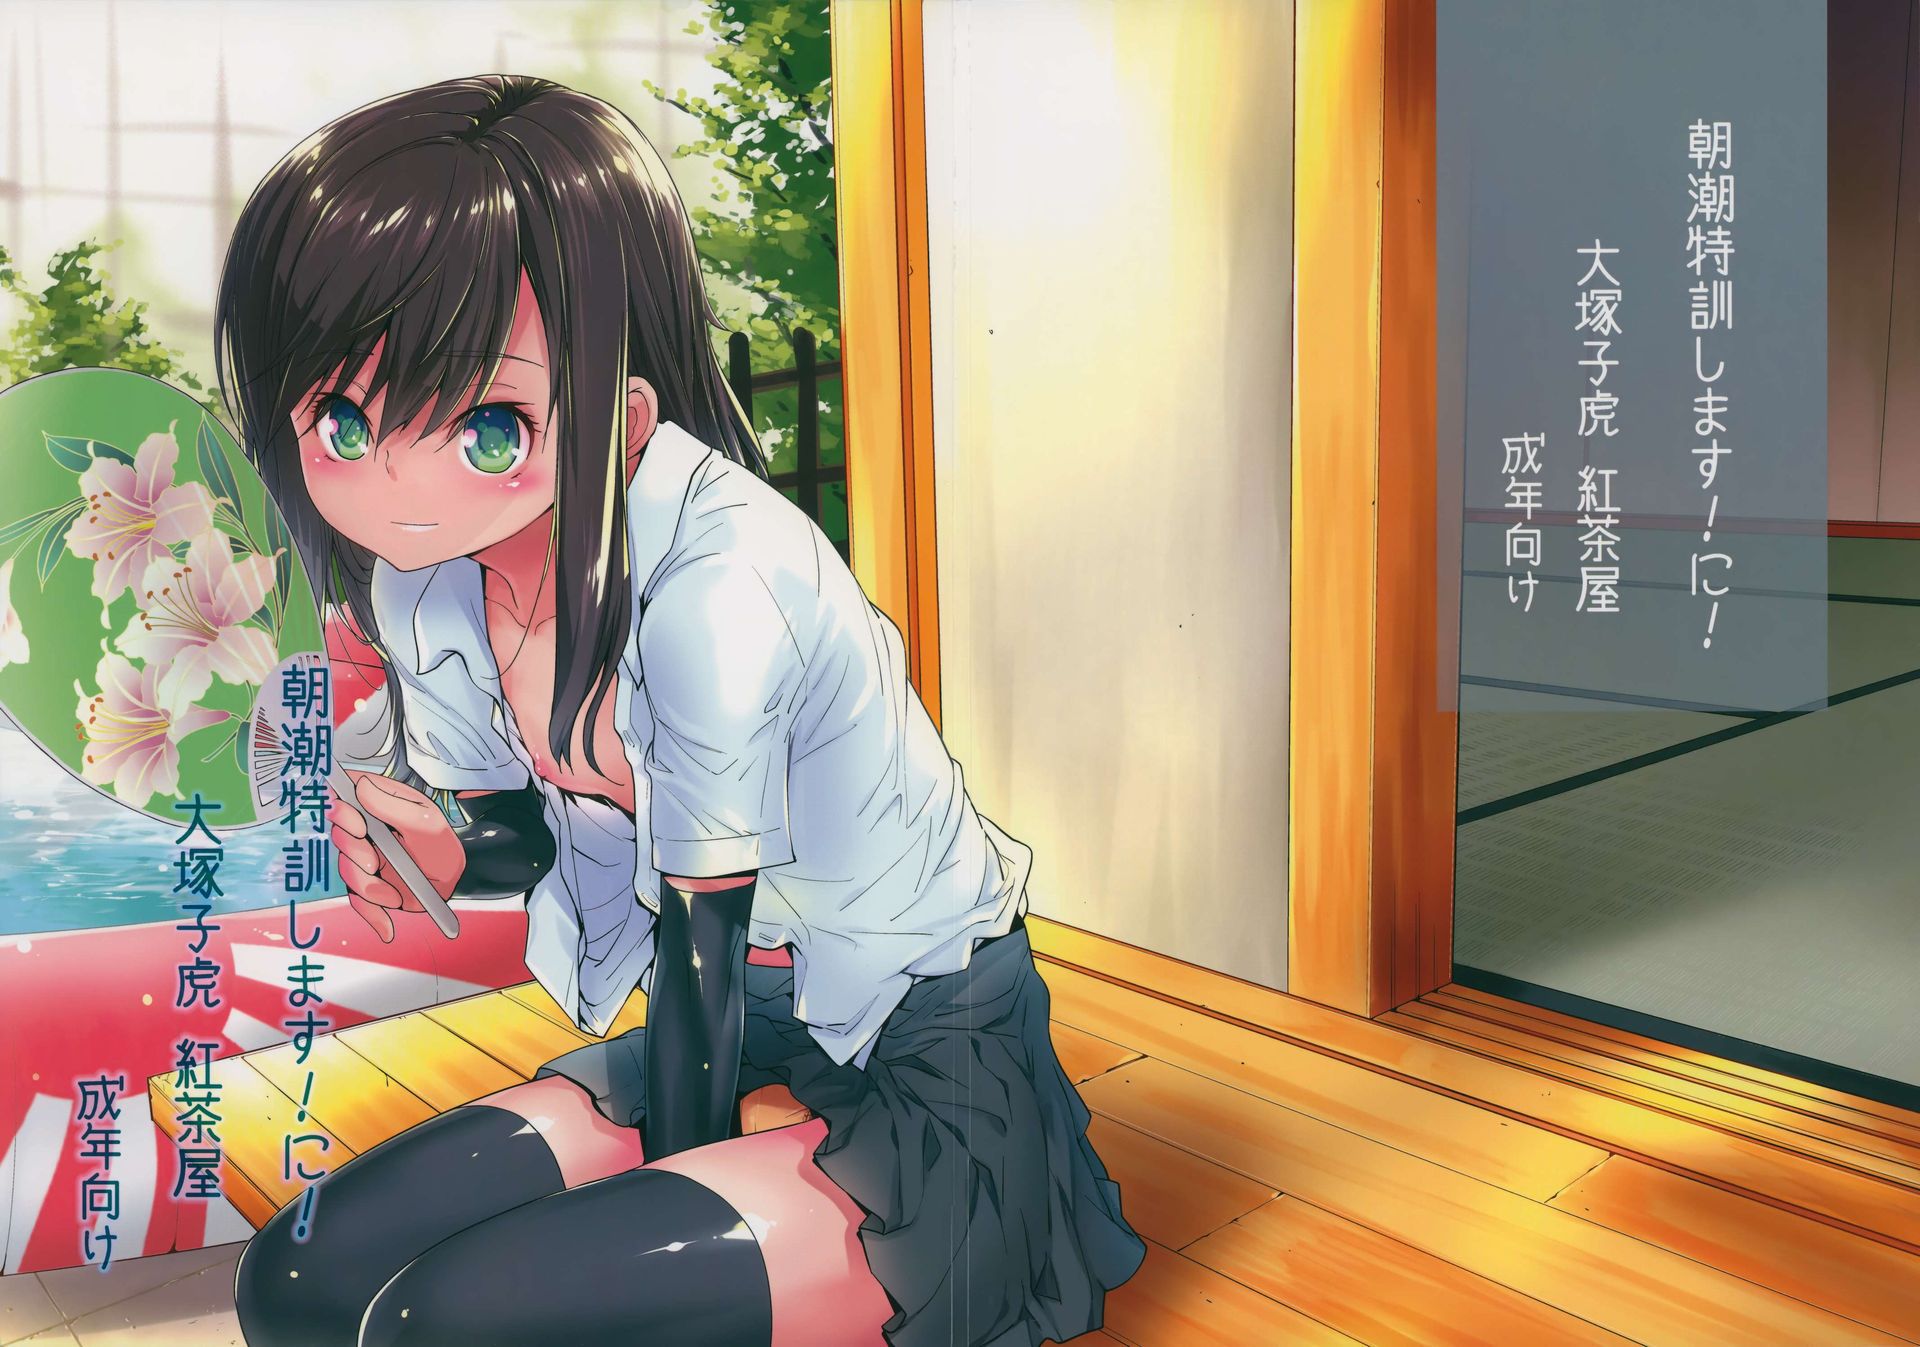 [Secondary, ZIP] pretty serious ship it together images of asashio 100 31